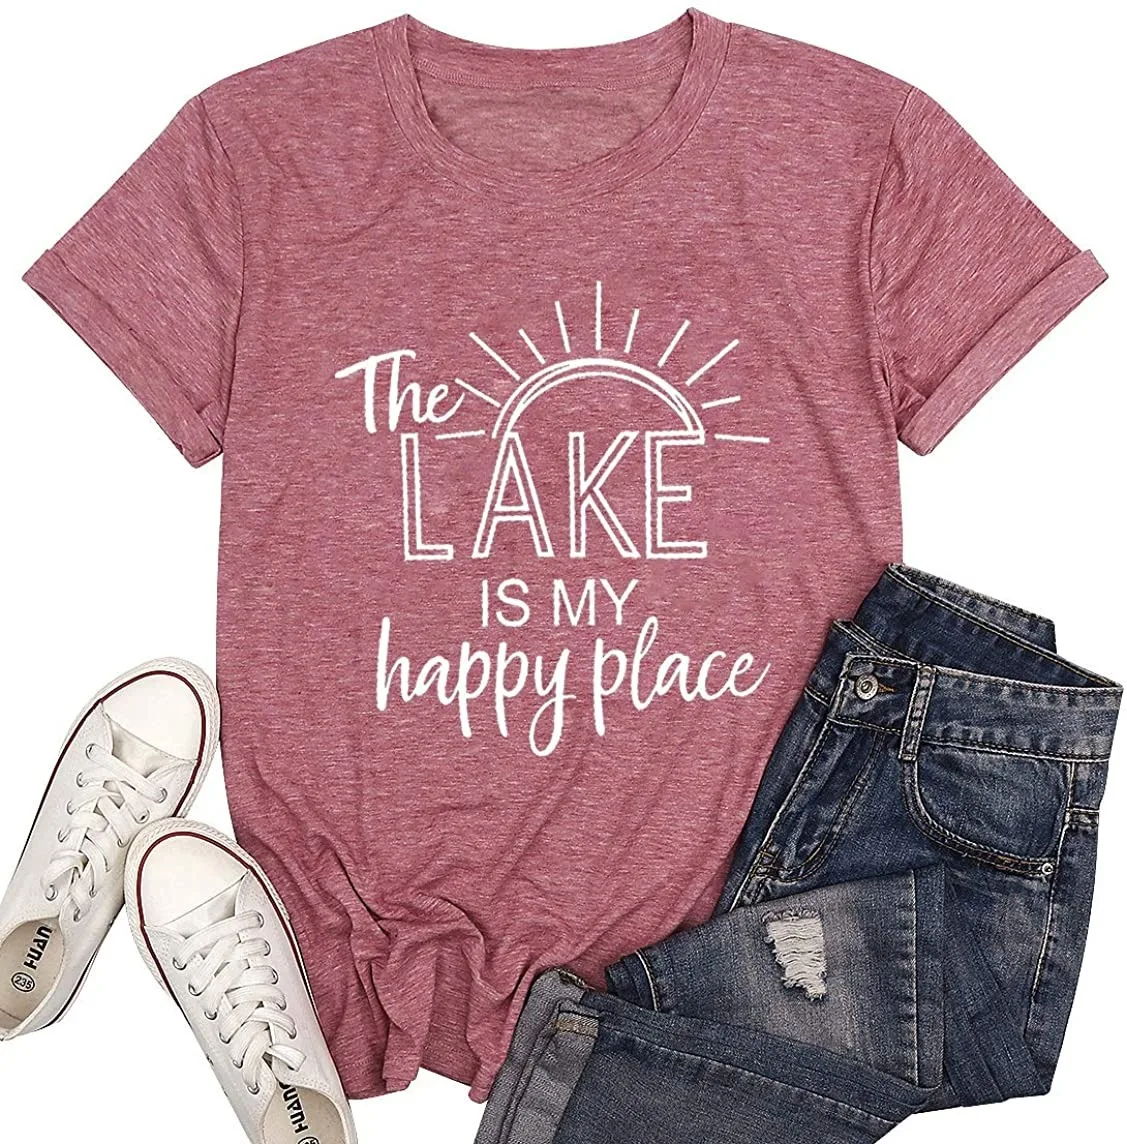 

The Lake Is My Happy Place Tshirt Women 90s Letter Funny T Shirts 2020 Girls Fashion Kawaii Vintage Graphic Tee Aesthetic new